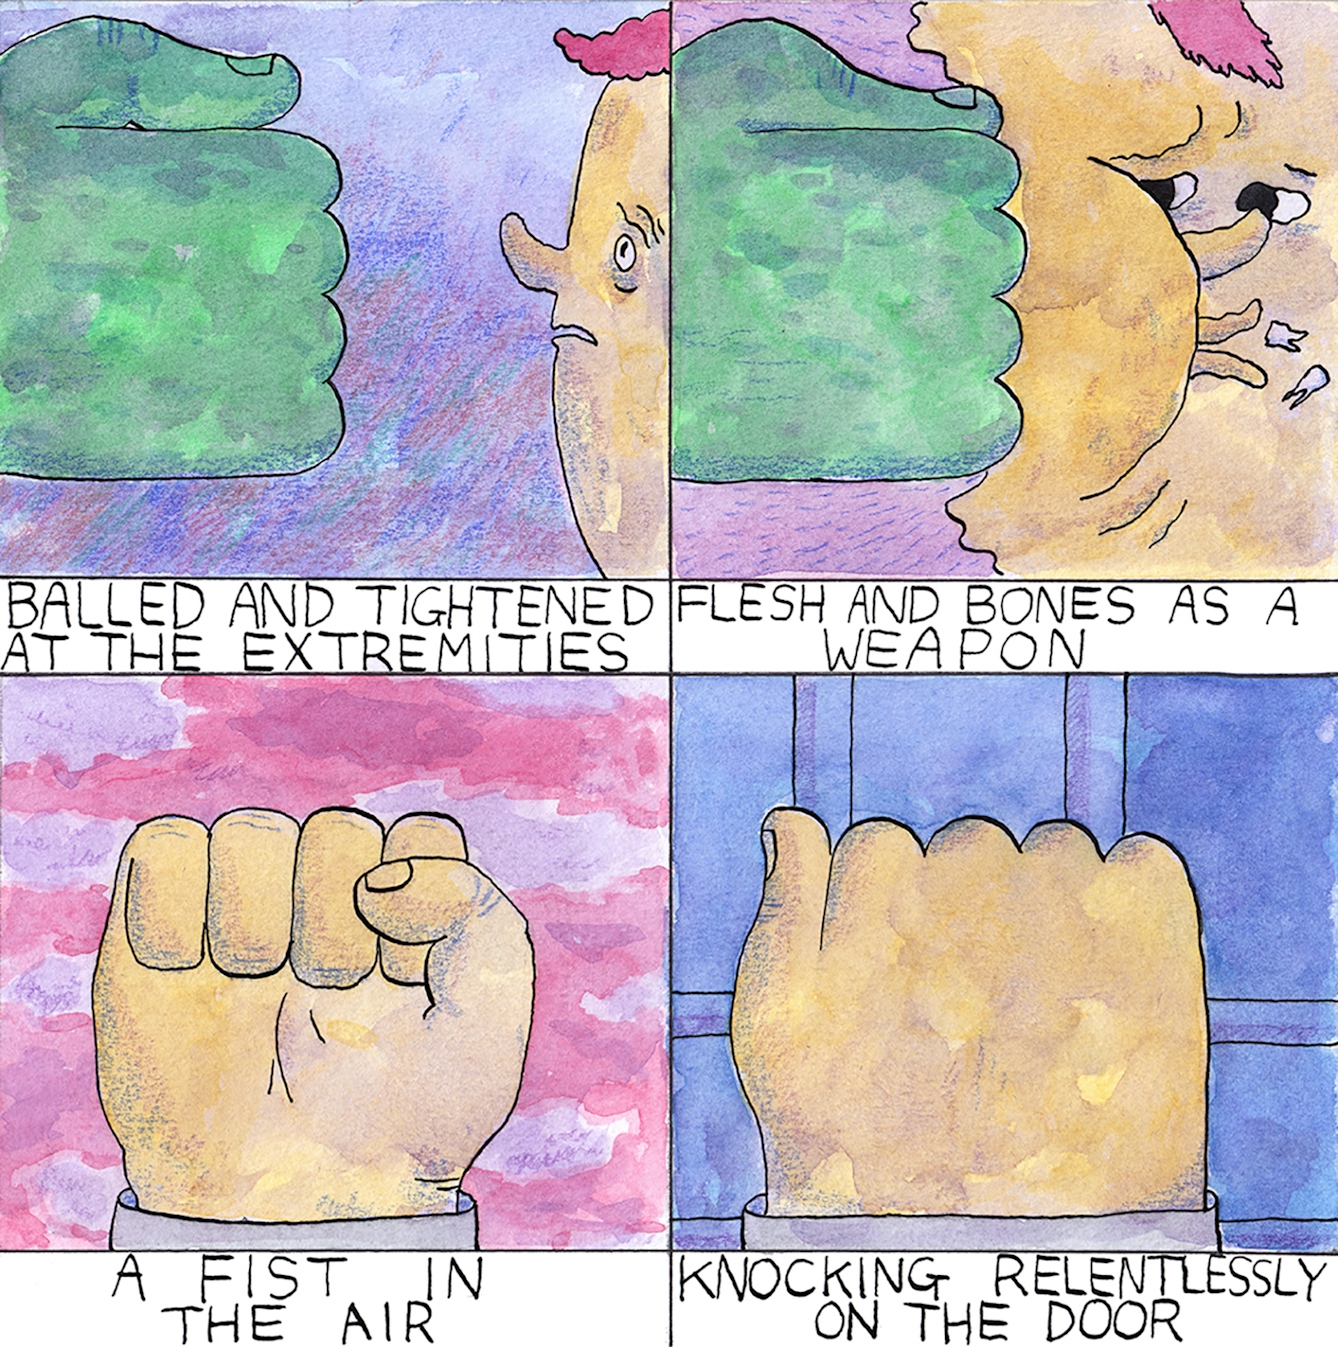 Fist comic by Rob Bidder depicts a fist in different four settings. The first slice shows a fist pointed at someone, in the second slice someone is being punched in the face as their teeth fall out, the third is a fist in the air and the final slice is someone knocking on a door.